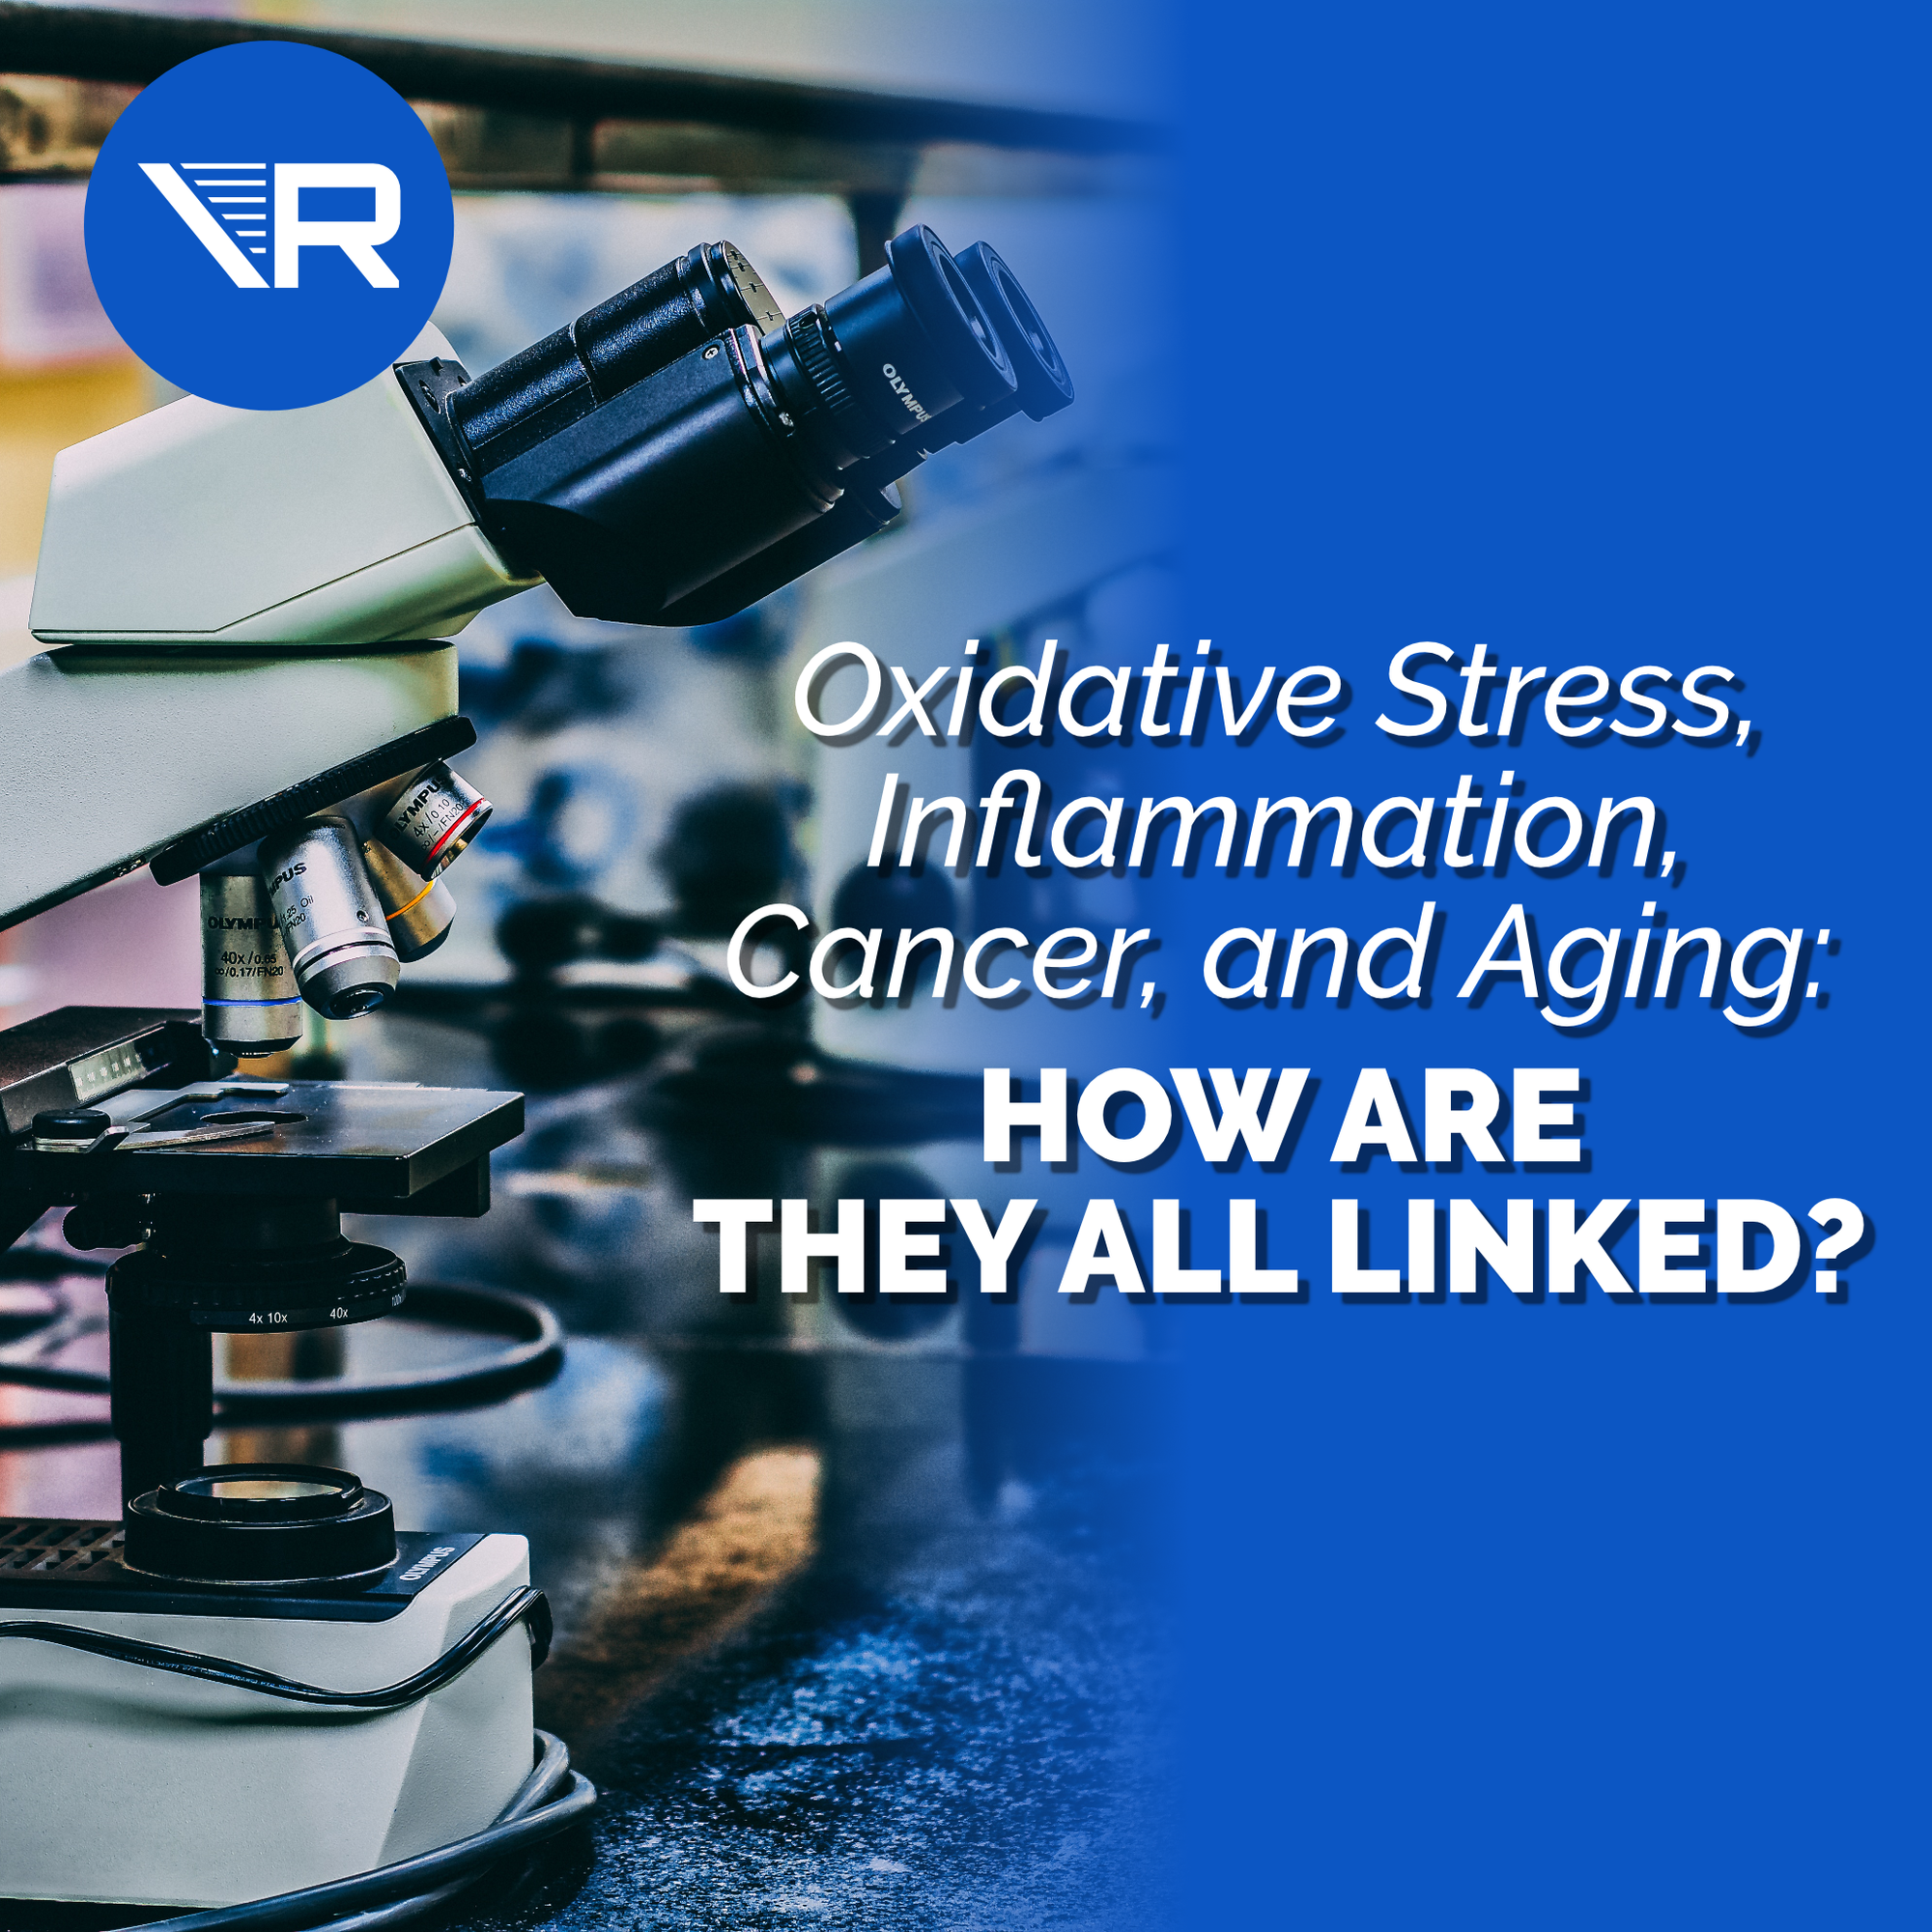 Oxidative stress and inflammation, cancer, and aging